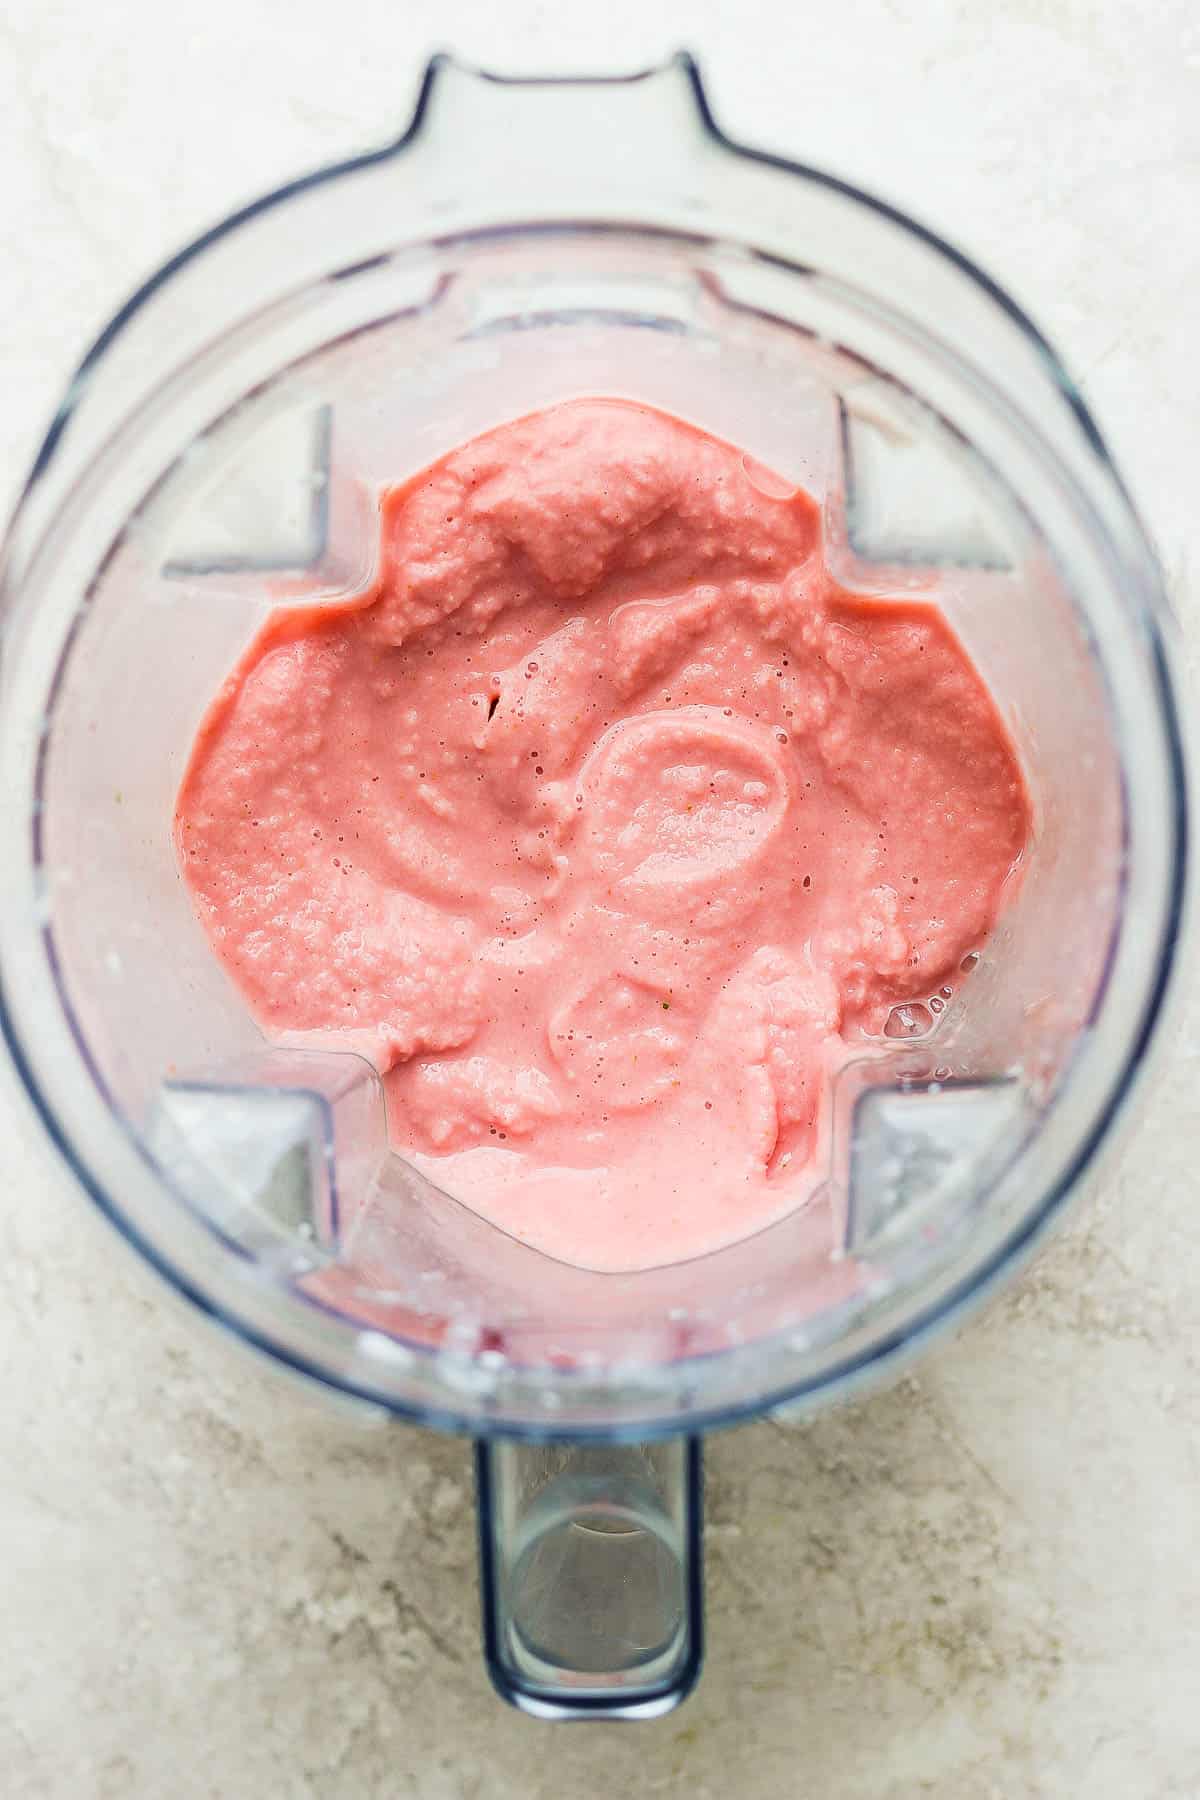 A fully blended watermelon smoothie in the blender.